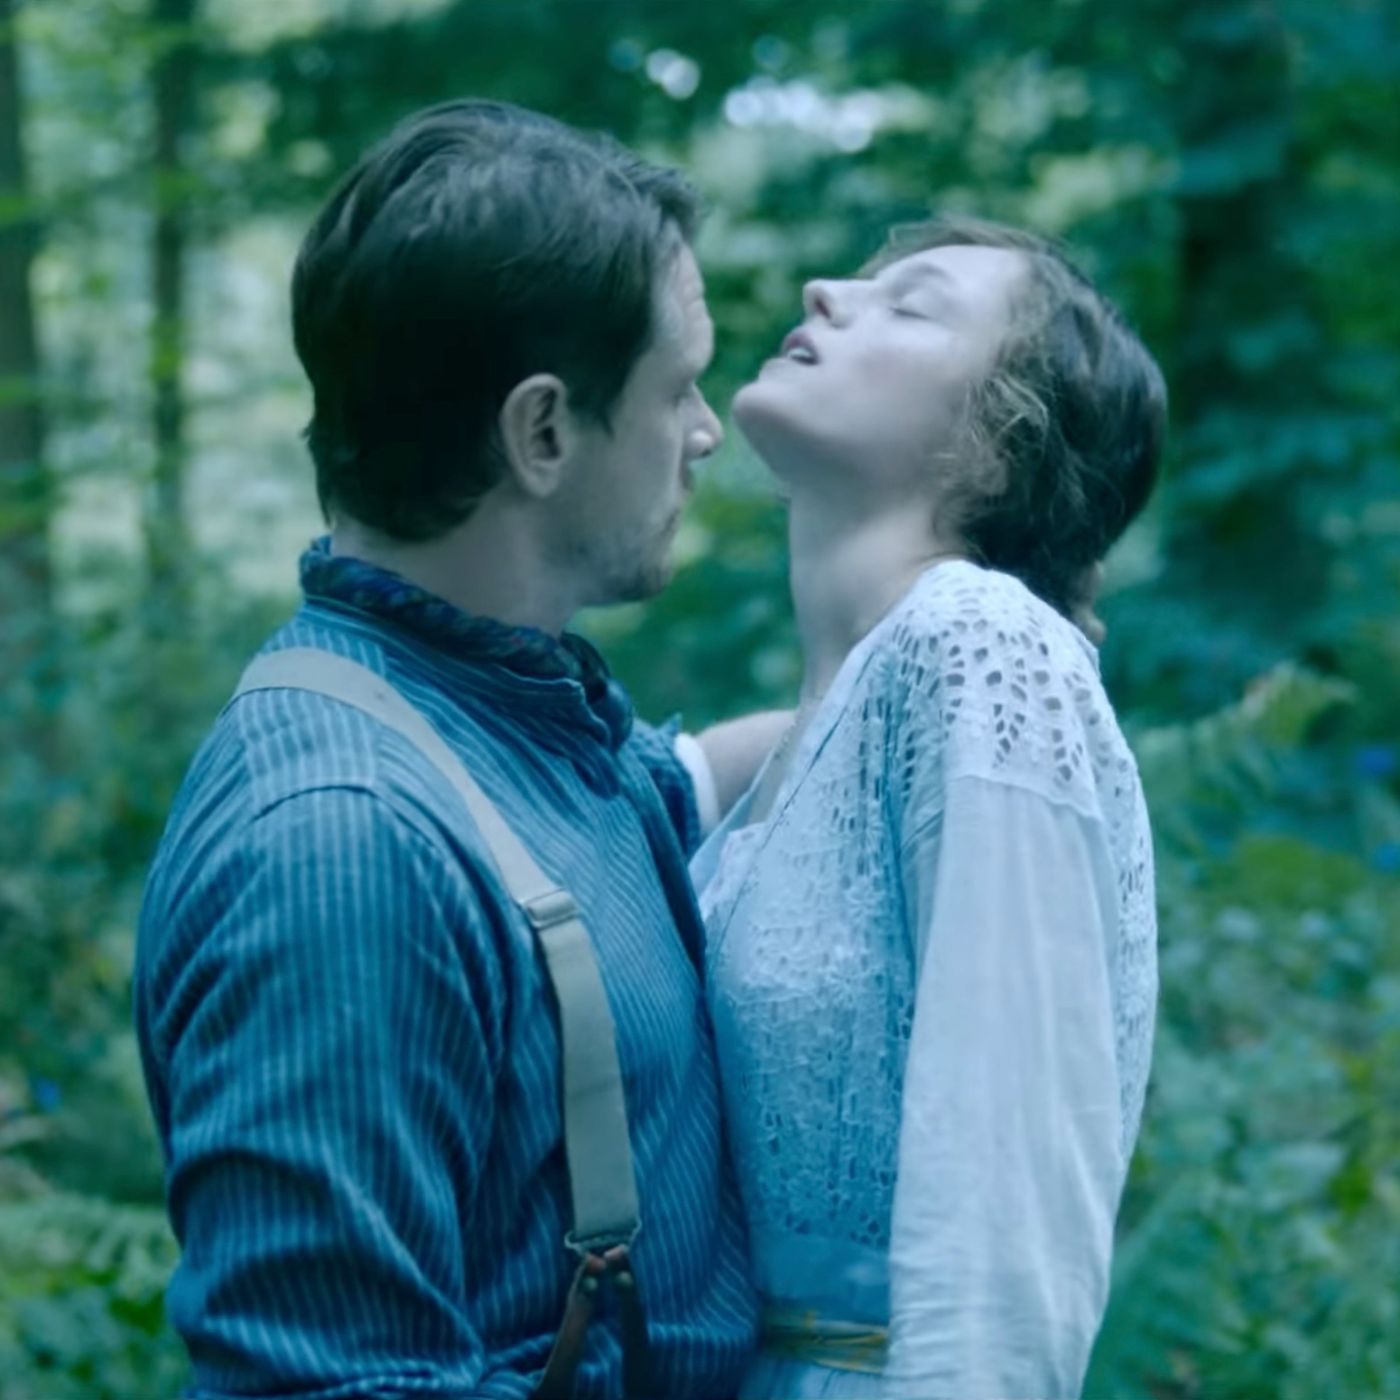 Lady Chatterleys Lover Trailer Teases Netflix Release pic